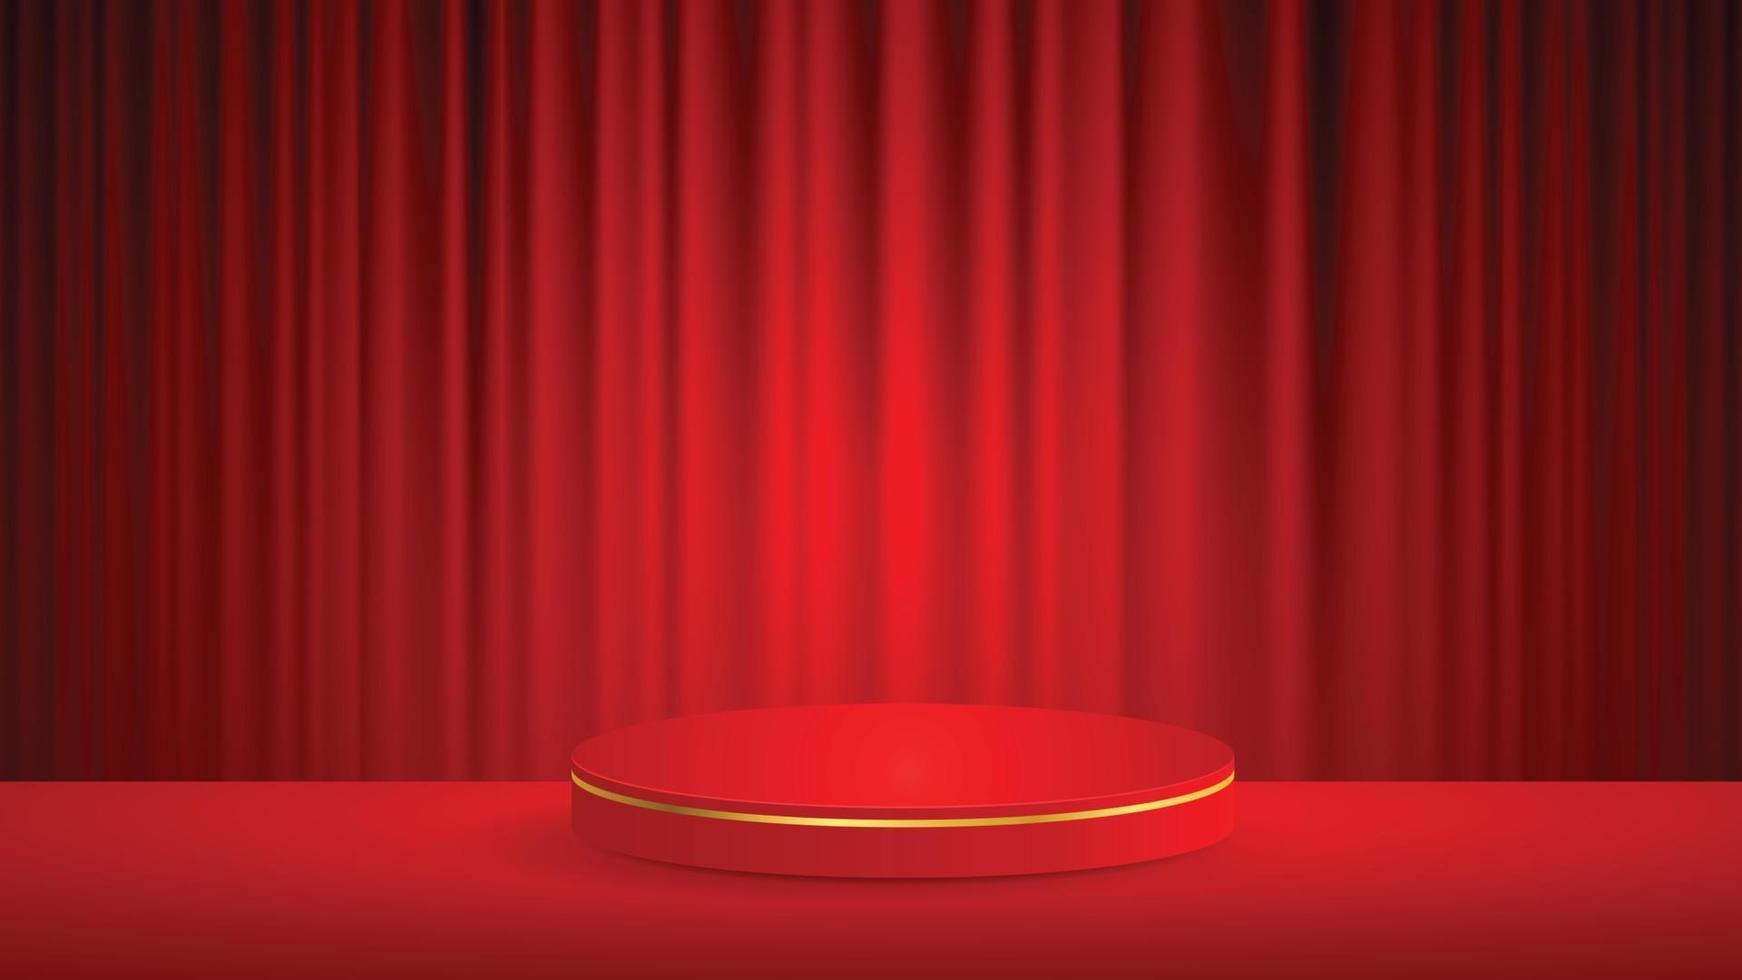 Abstract vector rendering 3d shape for placing the product with copy space. red podium with gold borders on the red floor, behind a red curtain. Vector illustration